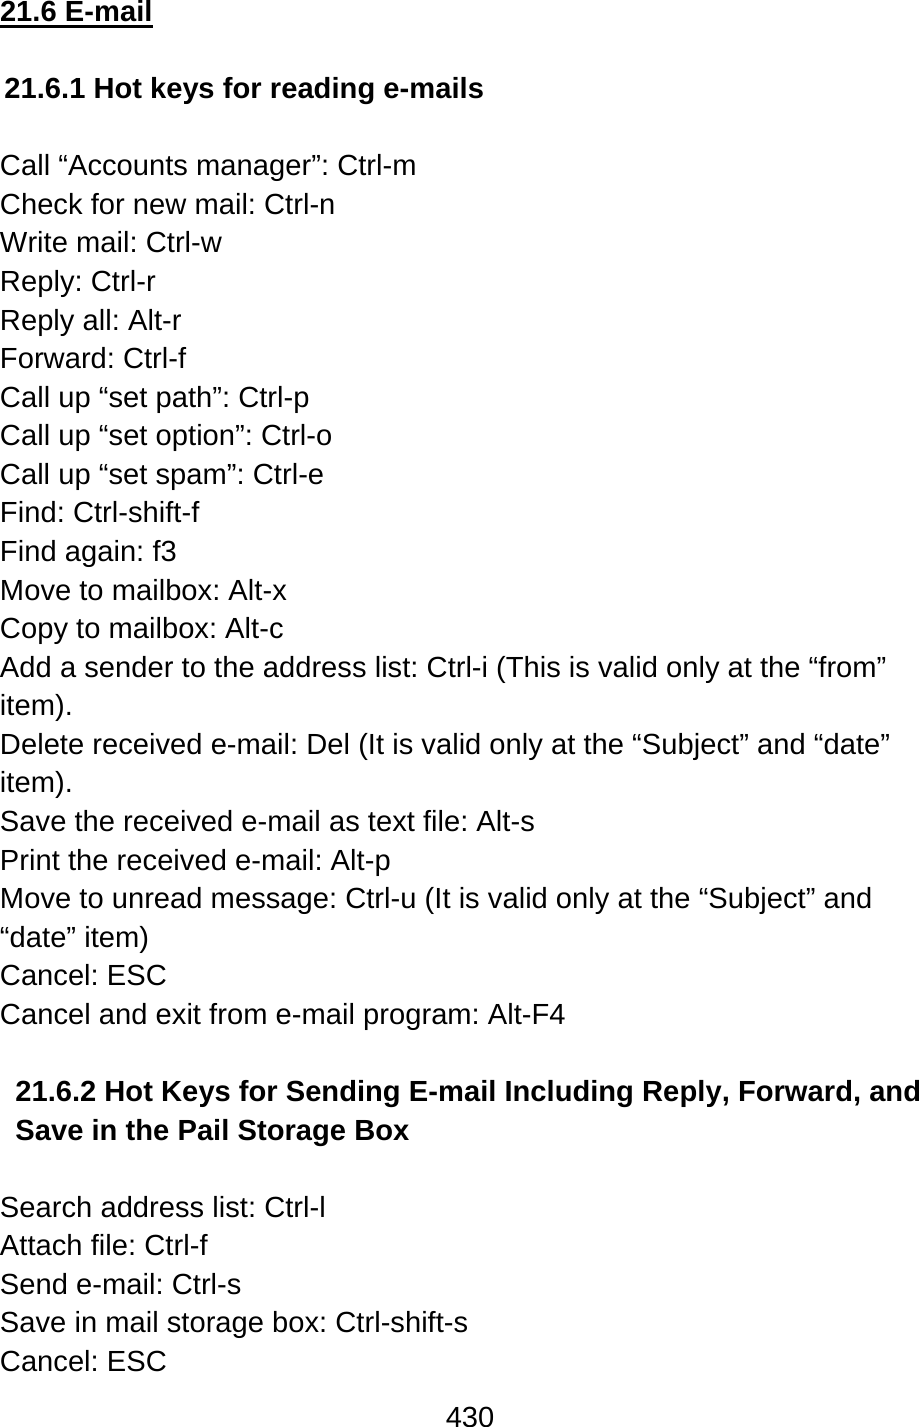 430  21.6 E-mail  21.6.1 Hot keys for reading e-mails  Call “Accounts manager”: Ctrl-m Check for new mail: Ctrl-n Write mail: Ctrl-w Reply: Ctrl-r Reply all: Alt-r Forward: Ctrl-f Call up “set path”: Ctrl-p Call up “set option”: Ctrl-o Call up “set spam”: Ctrl-e Find: Ctrl-shift-f Find again: f3   Move to mailbox: Alt-x Copy to mailbox: Alt-c Add a sender to the address list: Ctrl-i (This is valid only at the “from” item). Delete received e-mail: Del (It is valid only at the “Subject” and “date” item). Save the received e-mail as text file: Alt-s Print the received e-mail: Alt-p Move to unread message: Ctrl-u (It is valid only at the “Subject” and “date” item) Cancel: ESC Cancel and exit from e-mail program: Alt-F4  21.6.2 Hot Keys for Sending E-mail Including Reply, Forward, and Save in the Pail Storage Box  Search address list: Ctrl-l Attach file: Ctrl-f Send e-mail: Ctrl-s Save in mail storage box: Ctrl-shift-s Cancel: ESC 